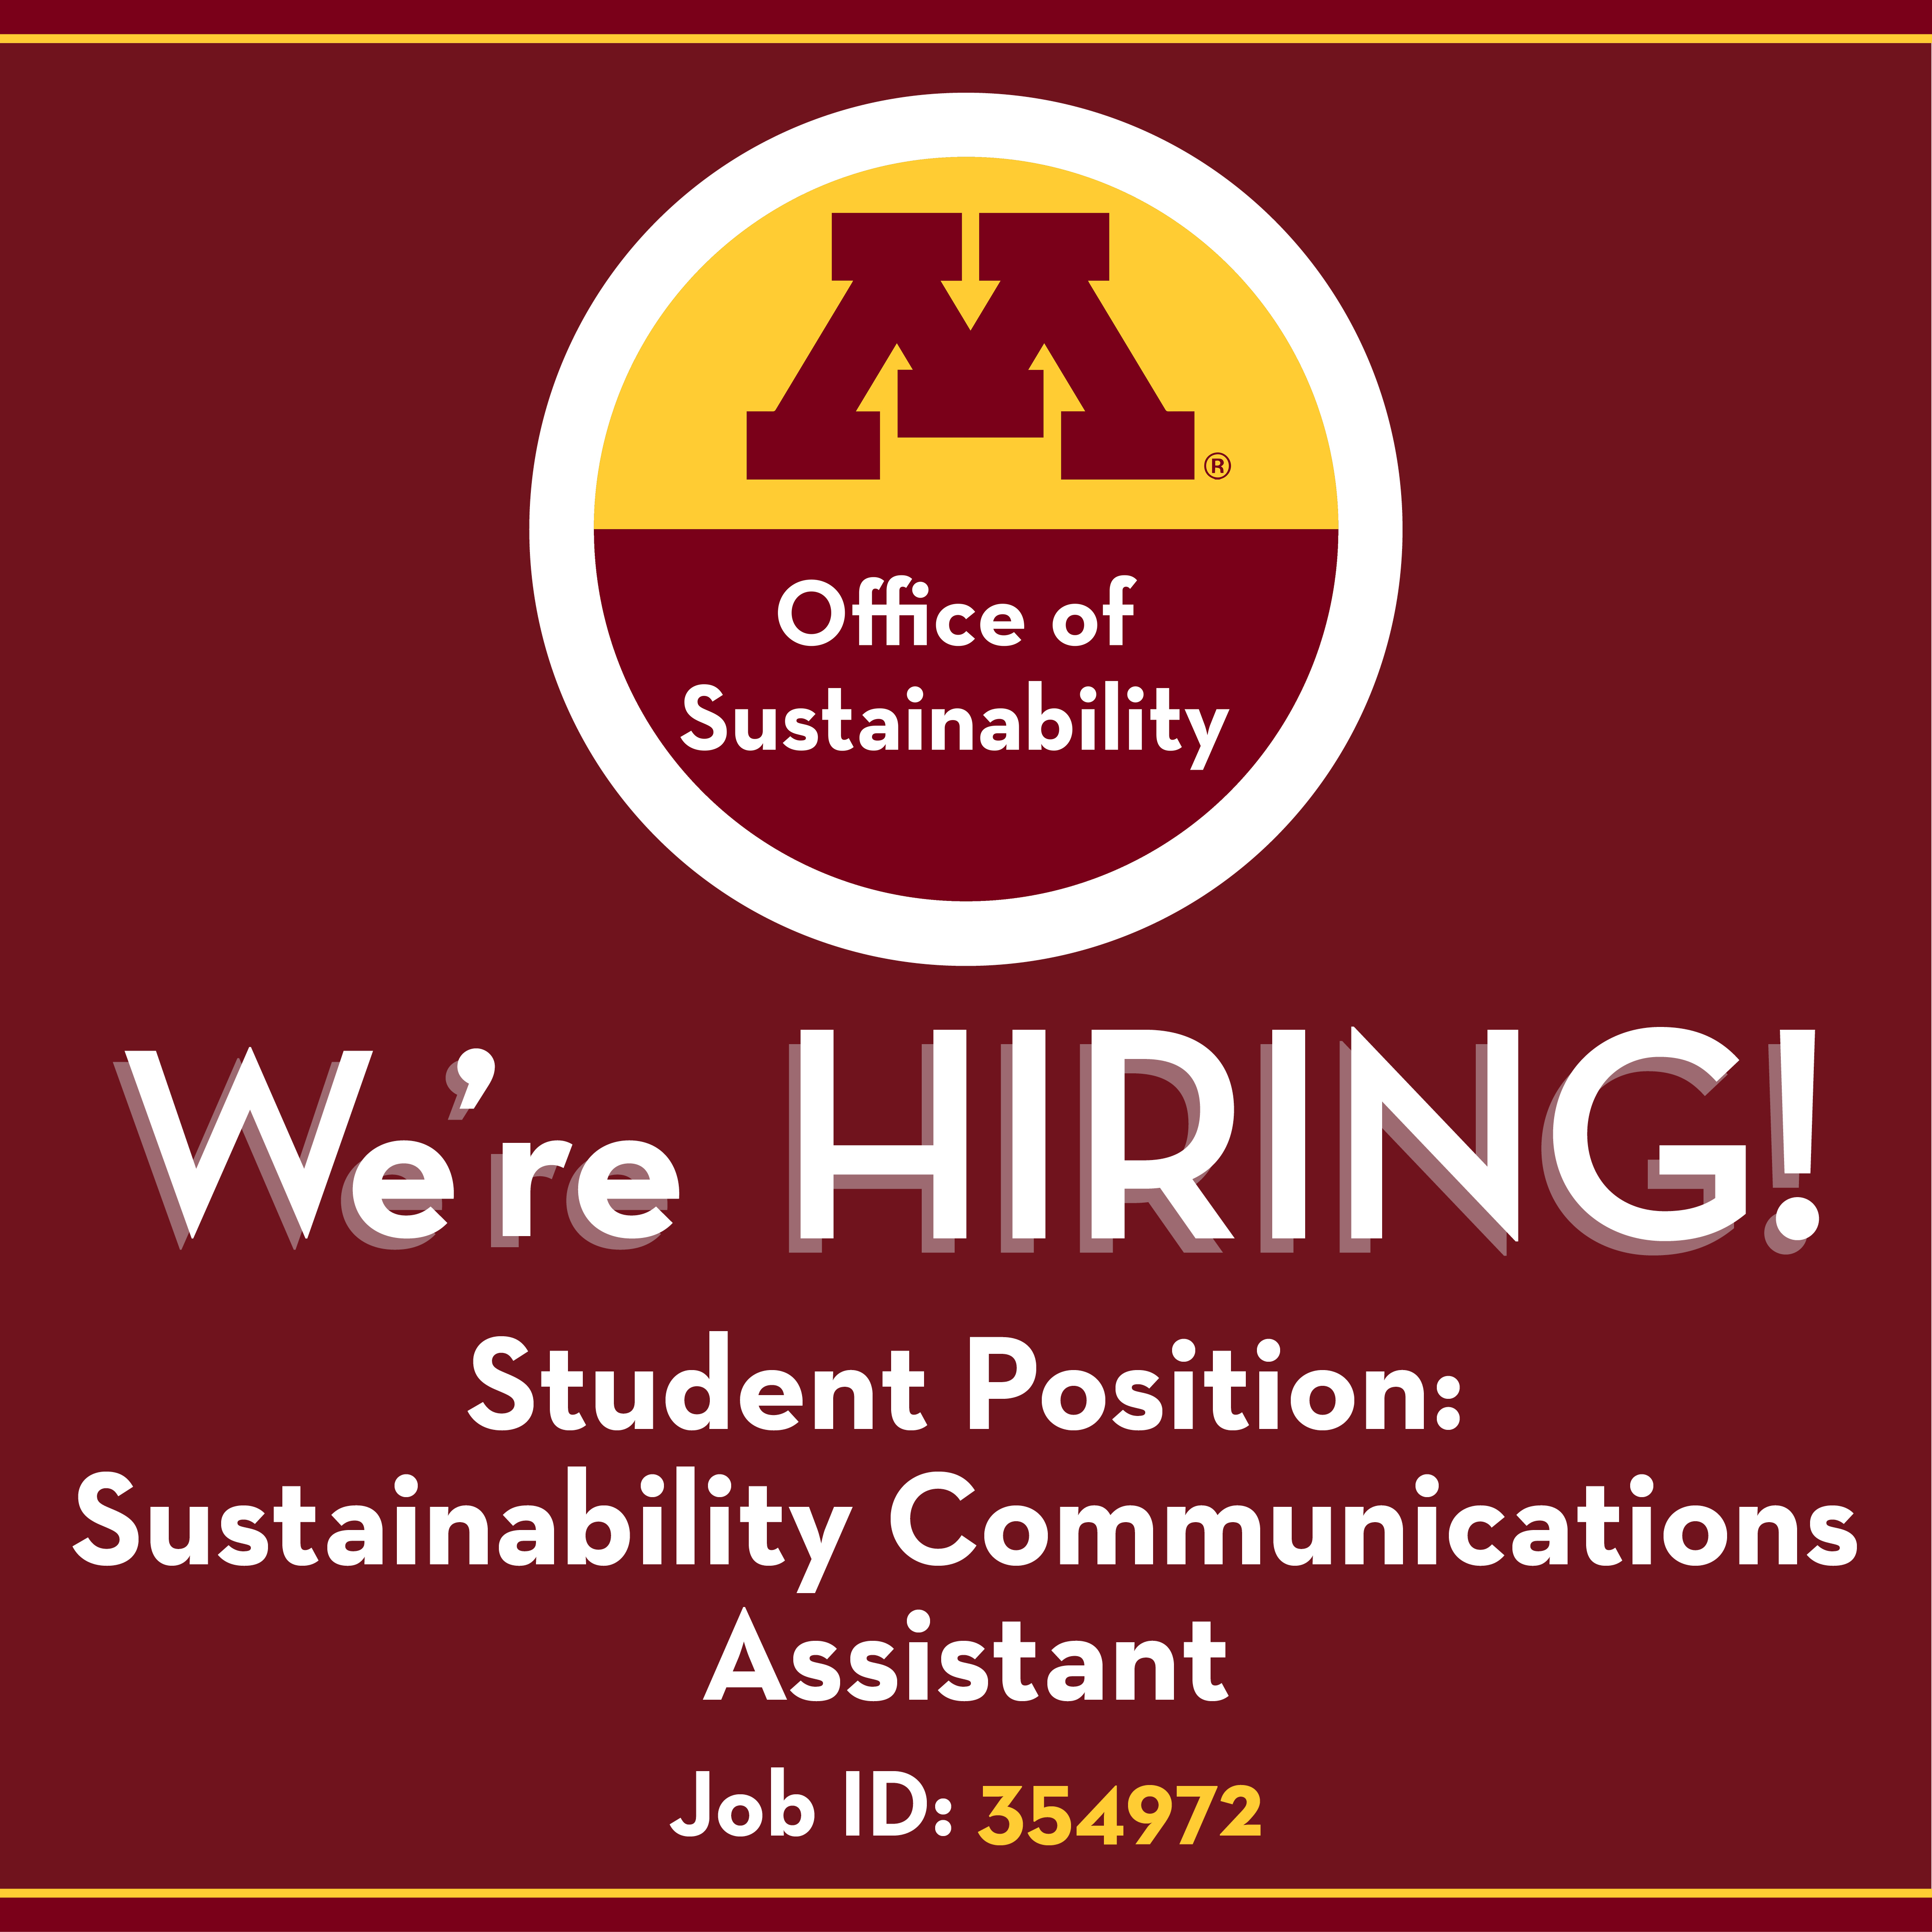 We're Hiring! Student Position: Sustainability Communications Assistant. Job ID: 354972